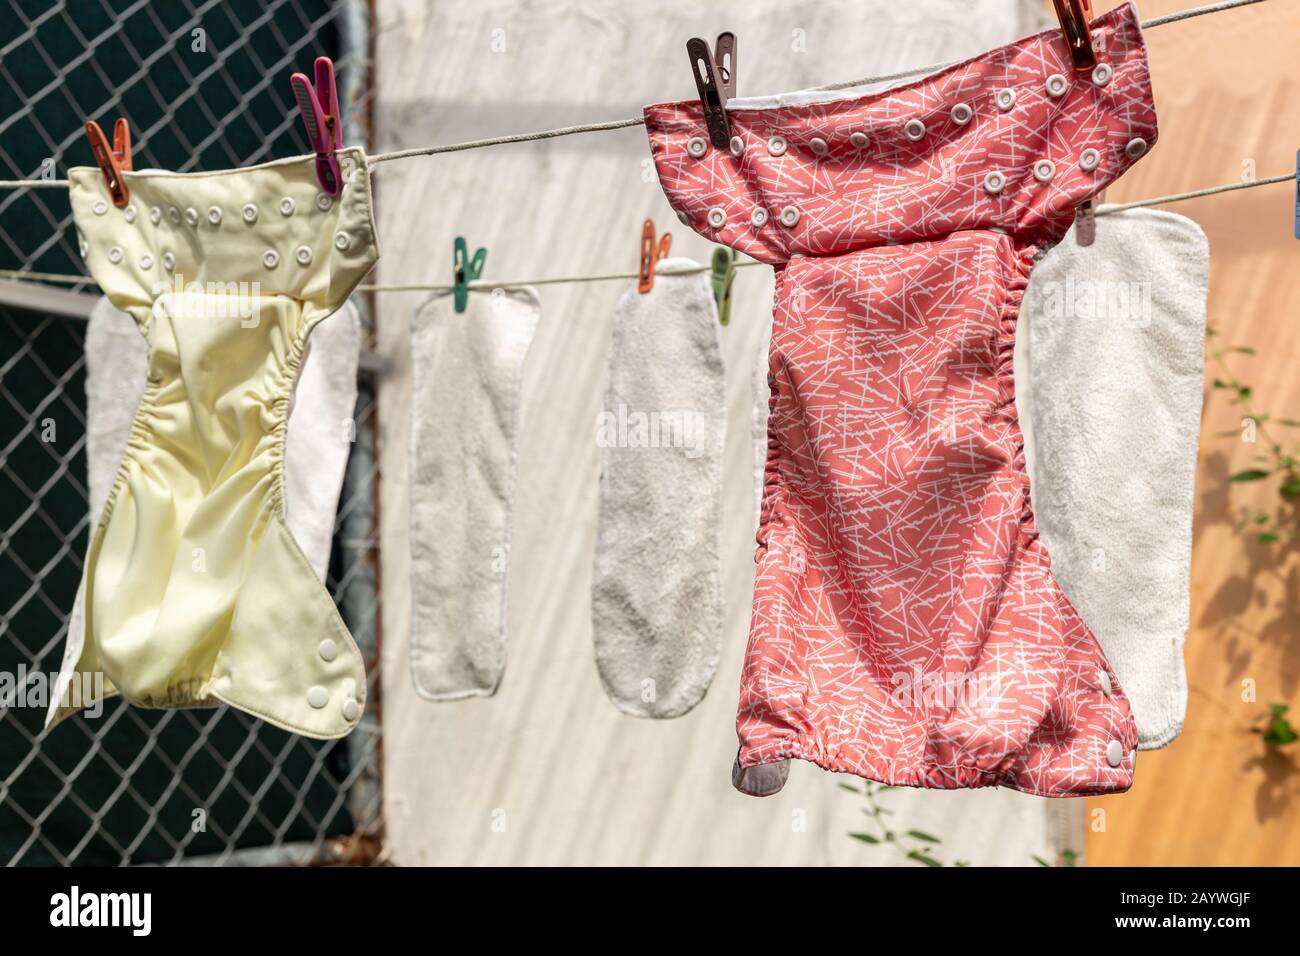 Washed cloth diapers hanging outside on a clothesline to dry in the sun  Stock Photo - Alamy